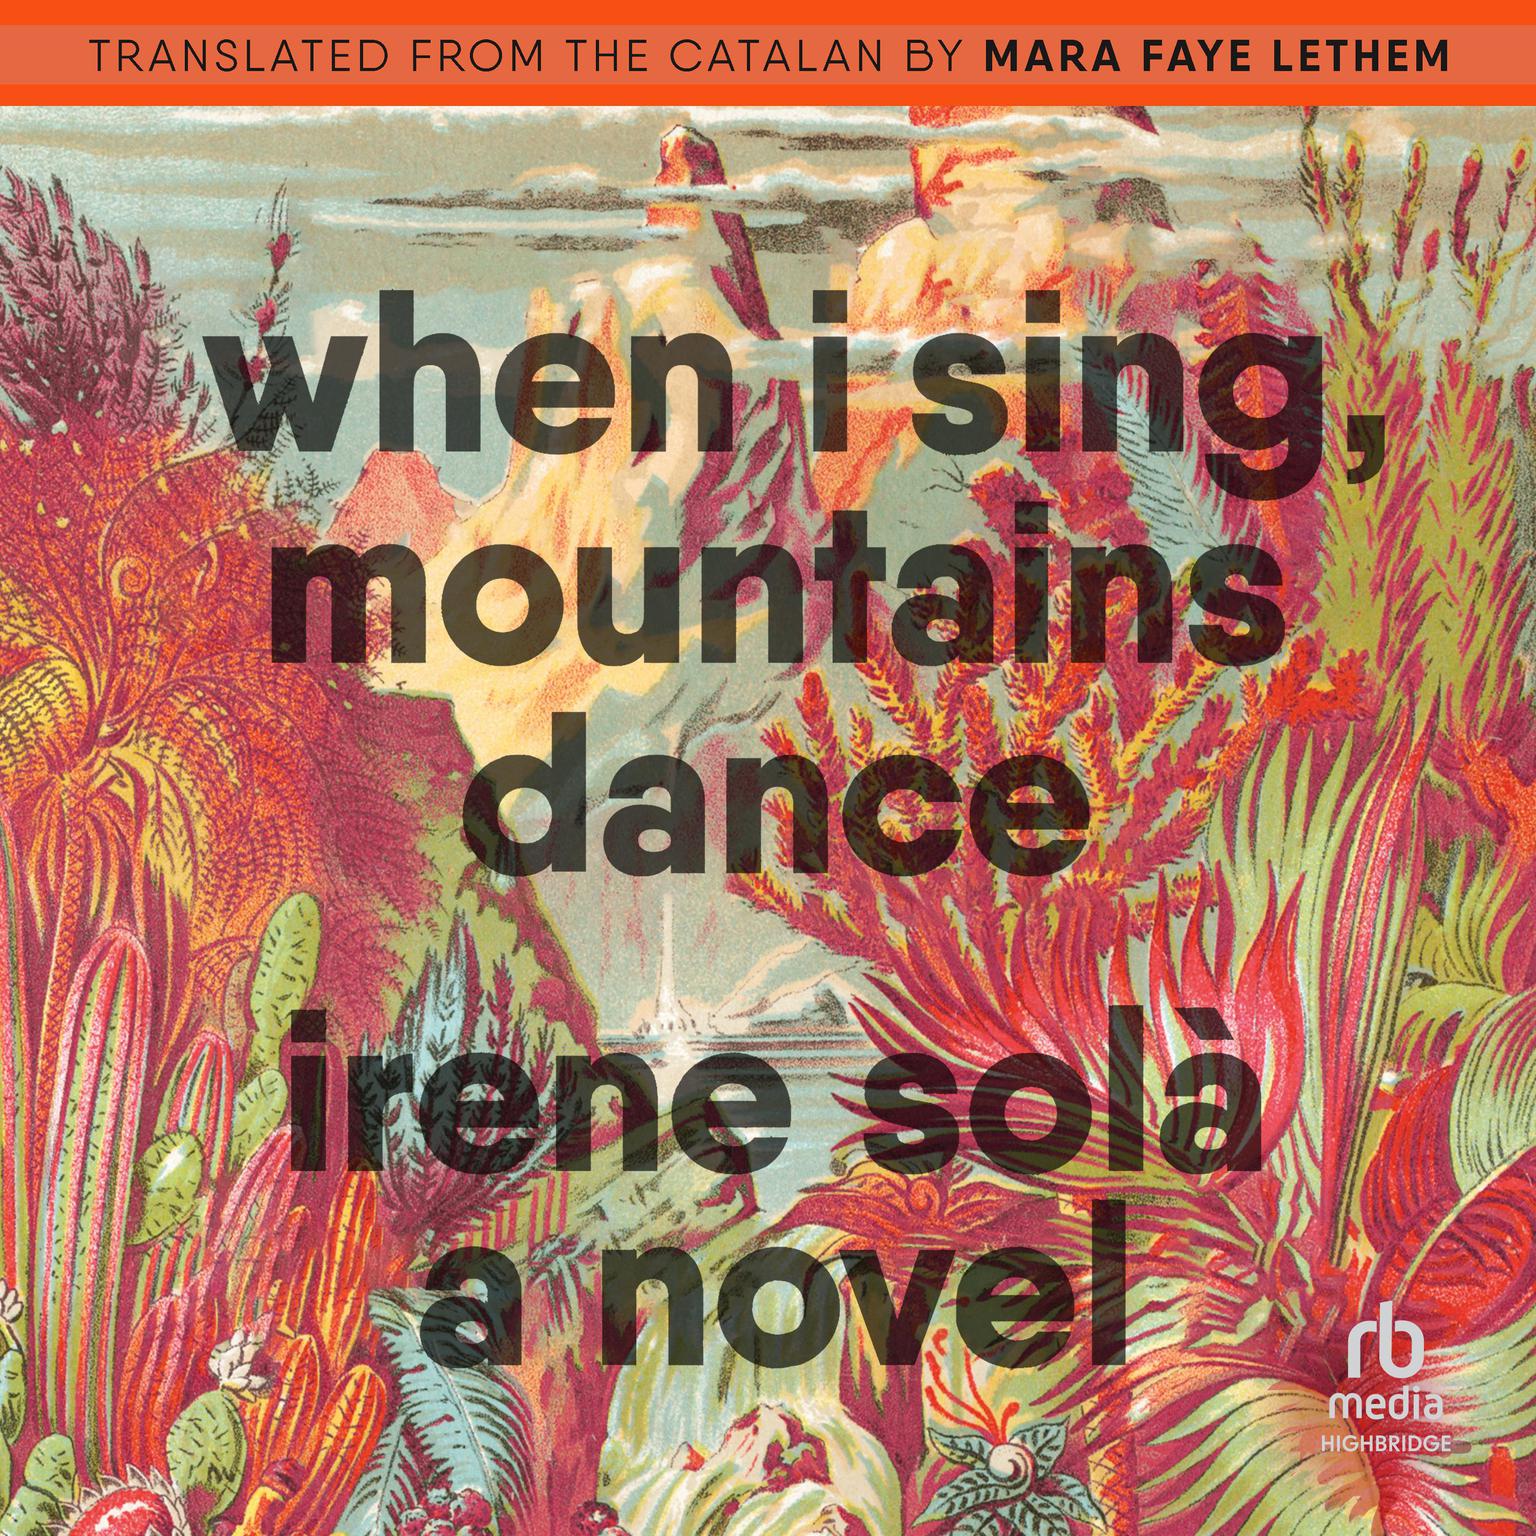 When I Sing, Mountains Dance: A Novel Audiobook, by Irene Solà